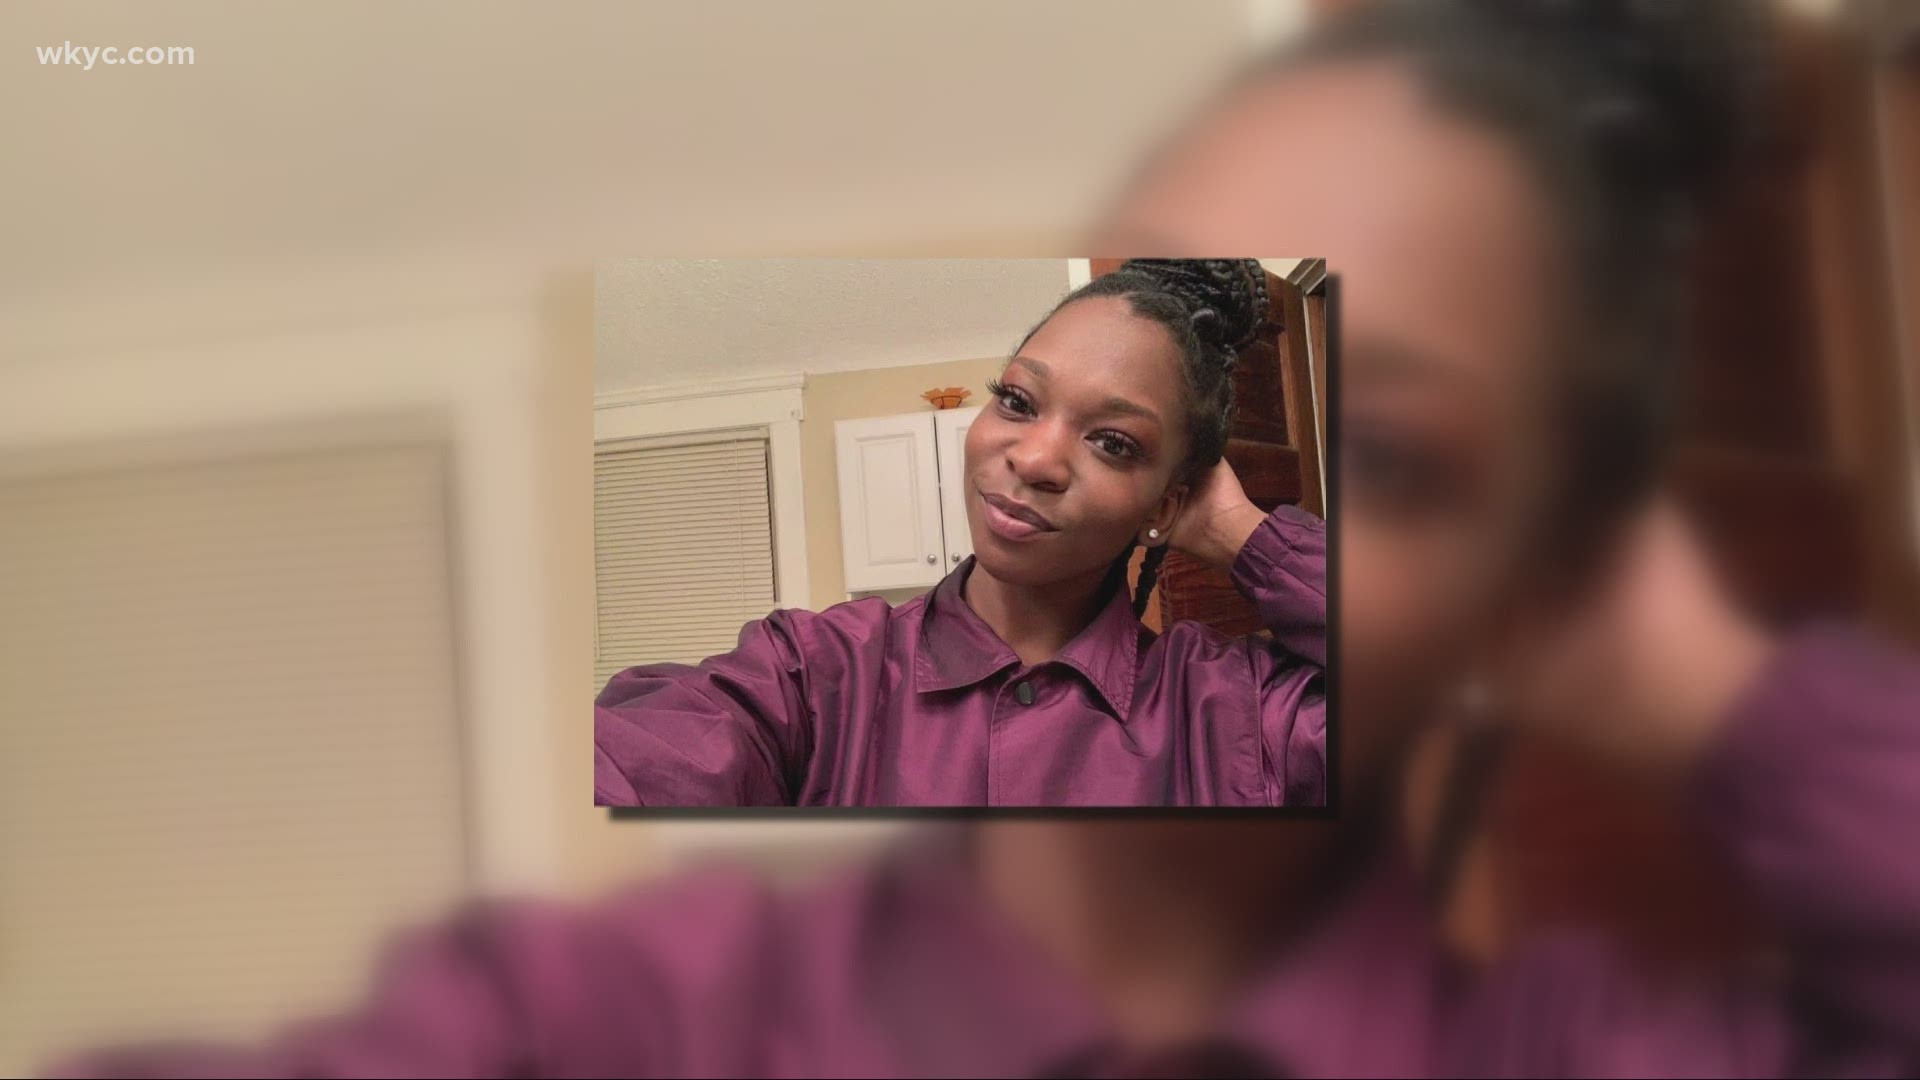 25-year-old Briana Spain was last seen at her home in the 11900 block of Scotland Avenue in Cleveland on Friday, May 7.